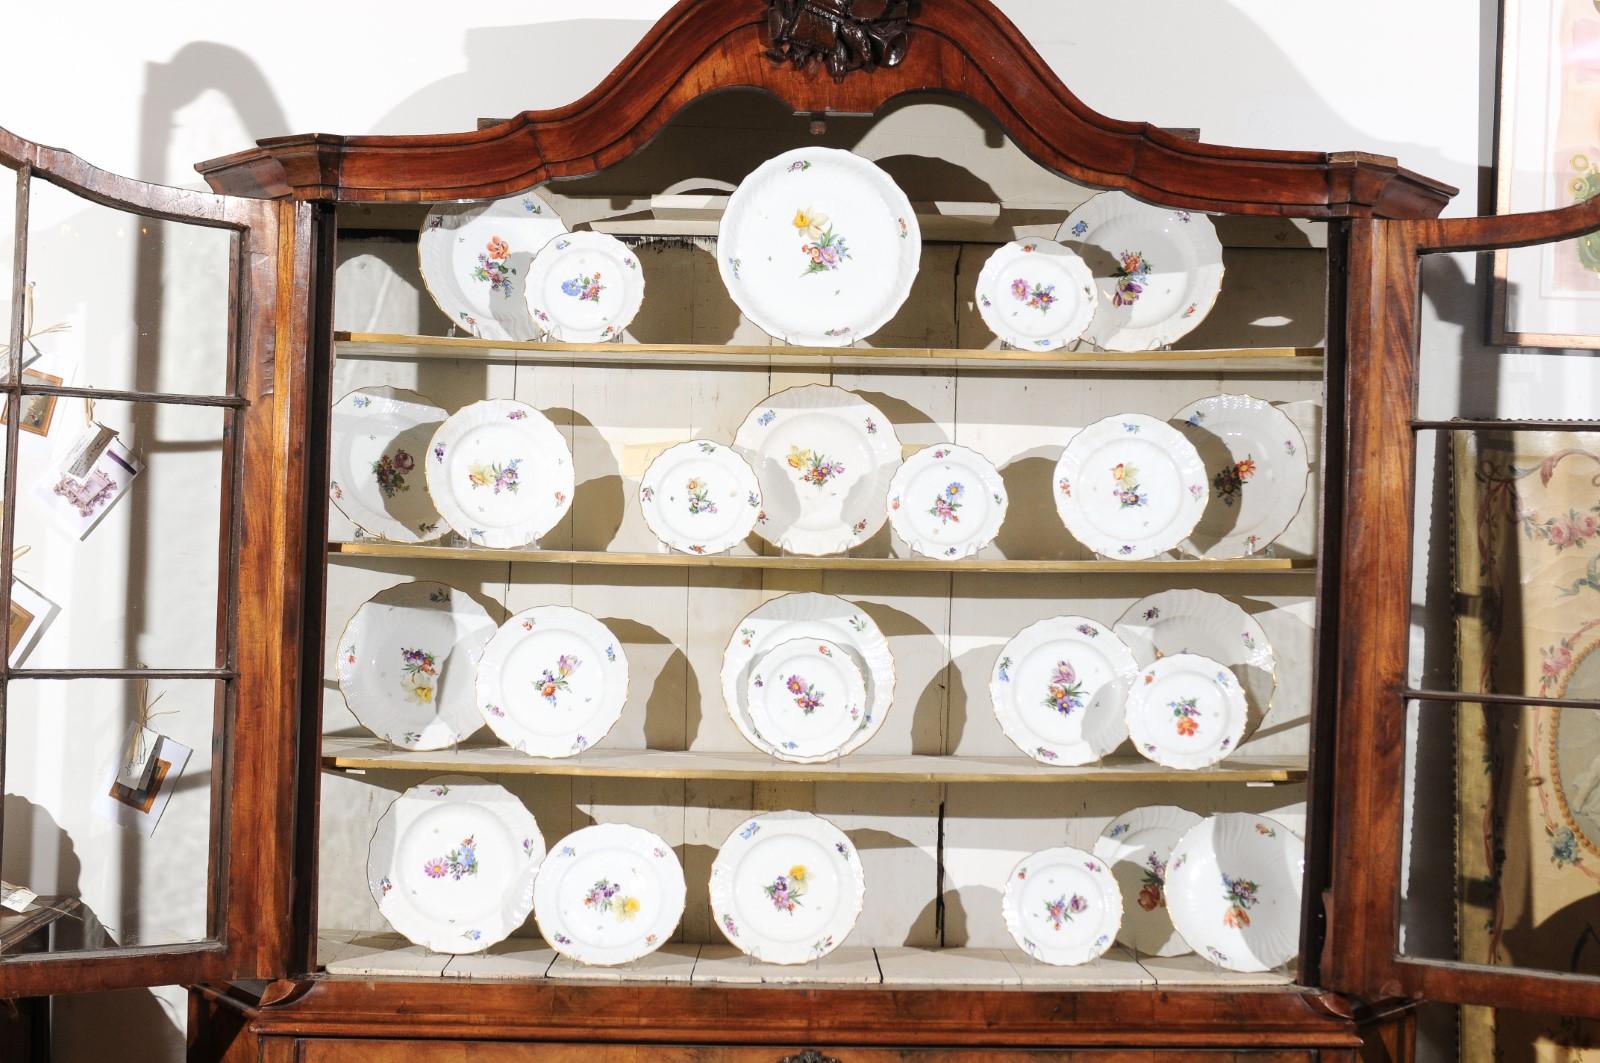 A set of 64 hand painted stamped Royal Copenhagen china from the early 20th century, with multi-color floral décor and scalloped gilt trim. Born in Denmark during the first half of the 20th century, this 16-piece place setting and serving dishes